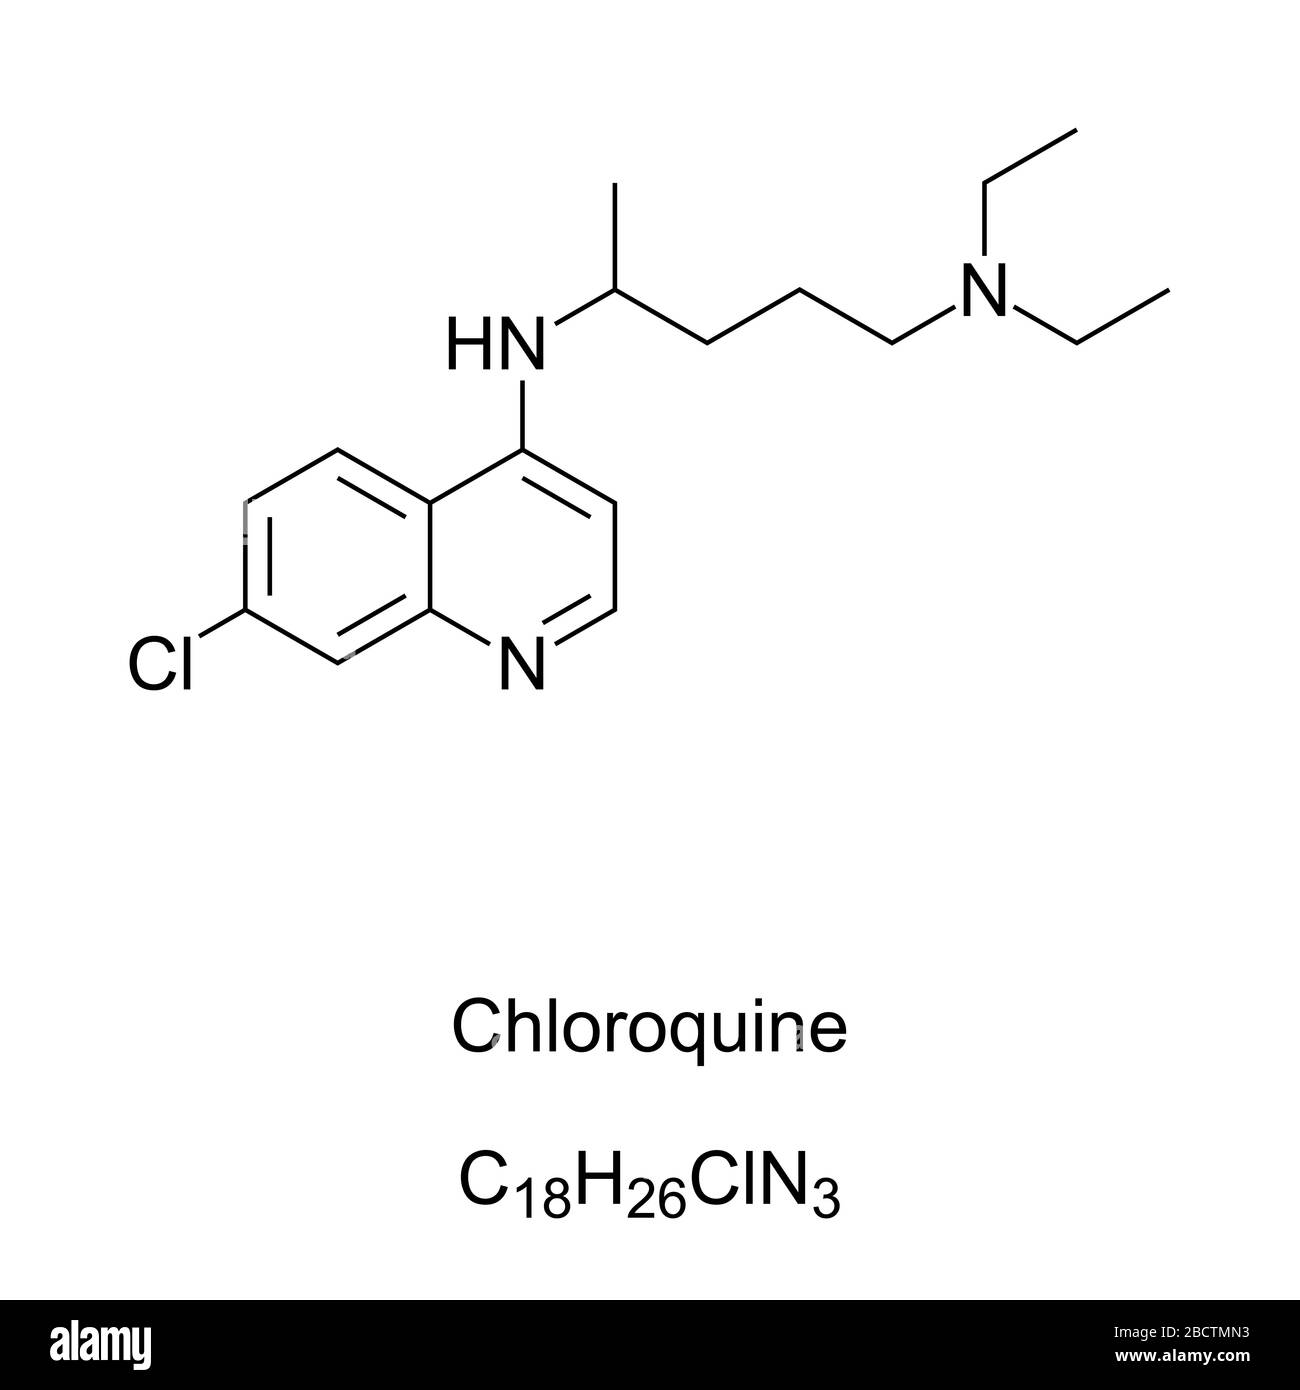 Chloroquine skeletal formula and molecular structure. Medication primarily used to prevent and treat malaria. Also being studied to treat COVID-19. Stock Photo